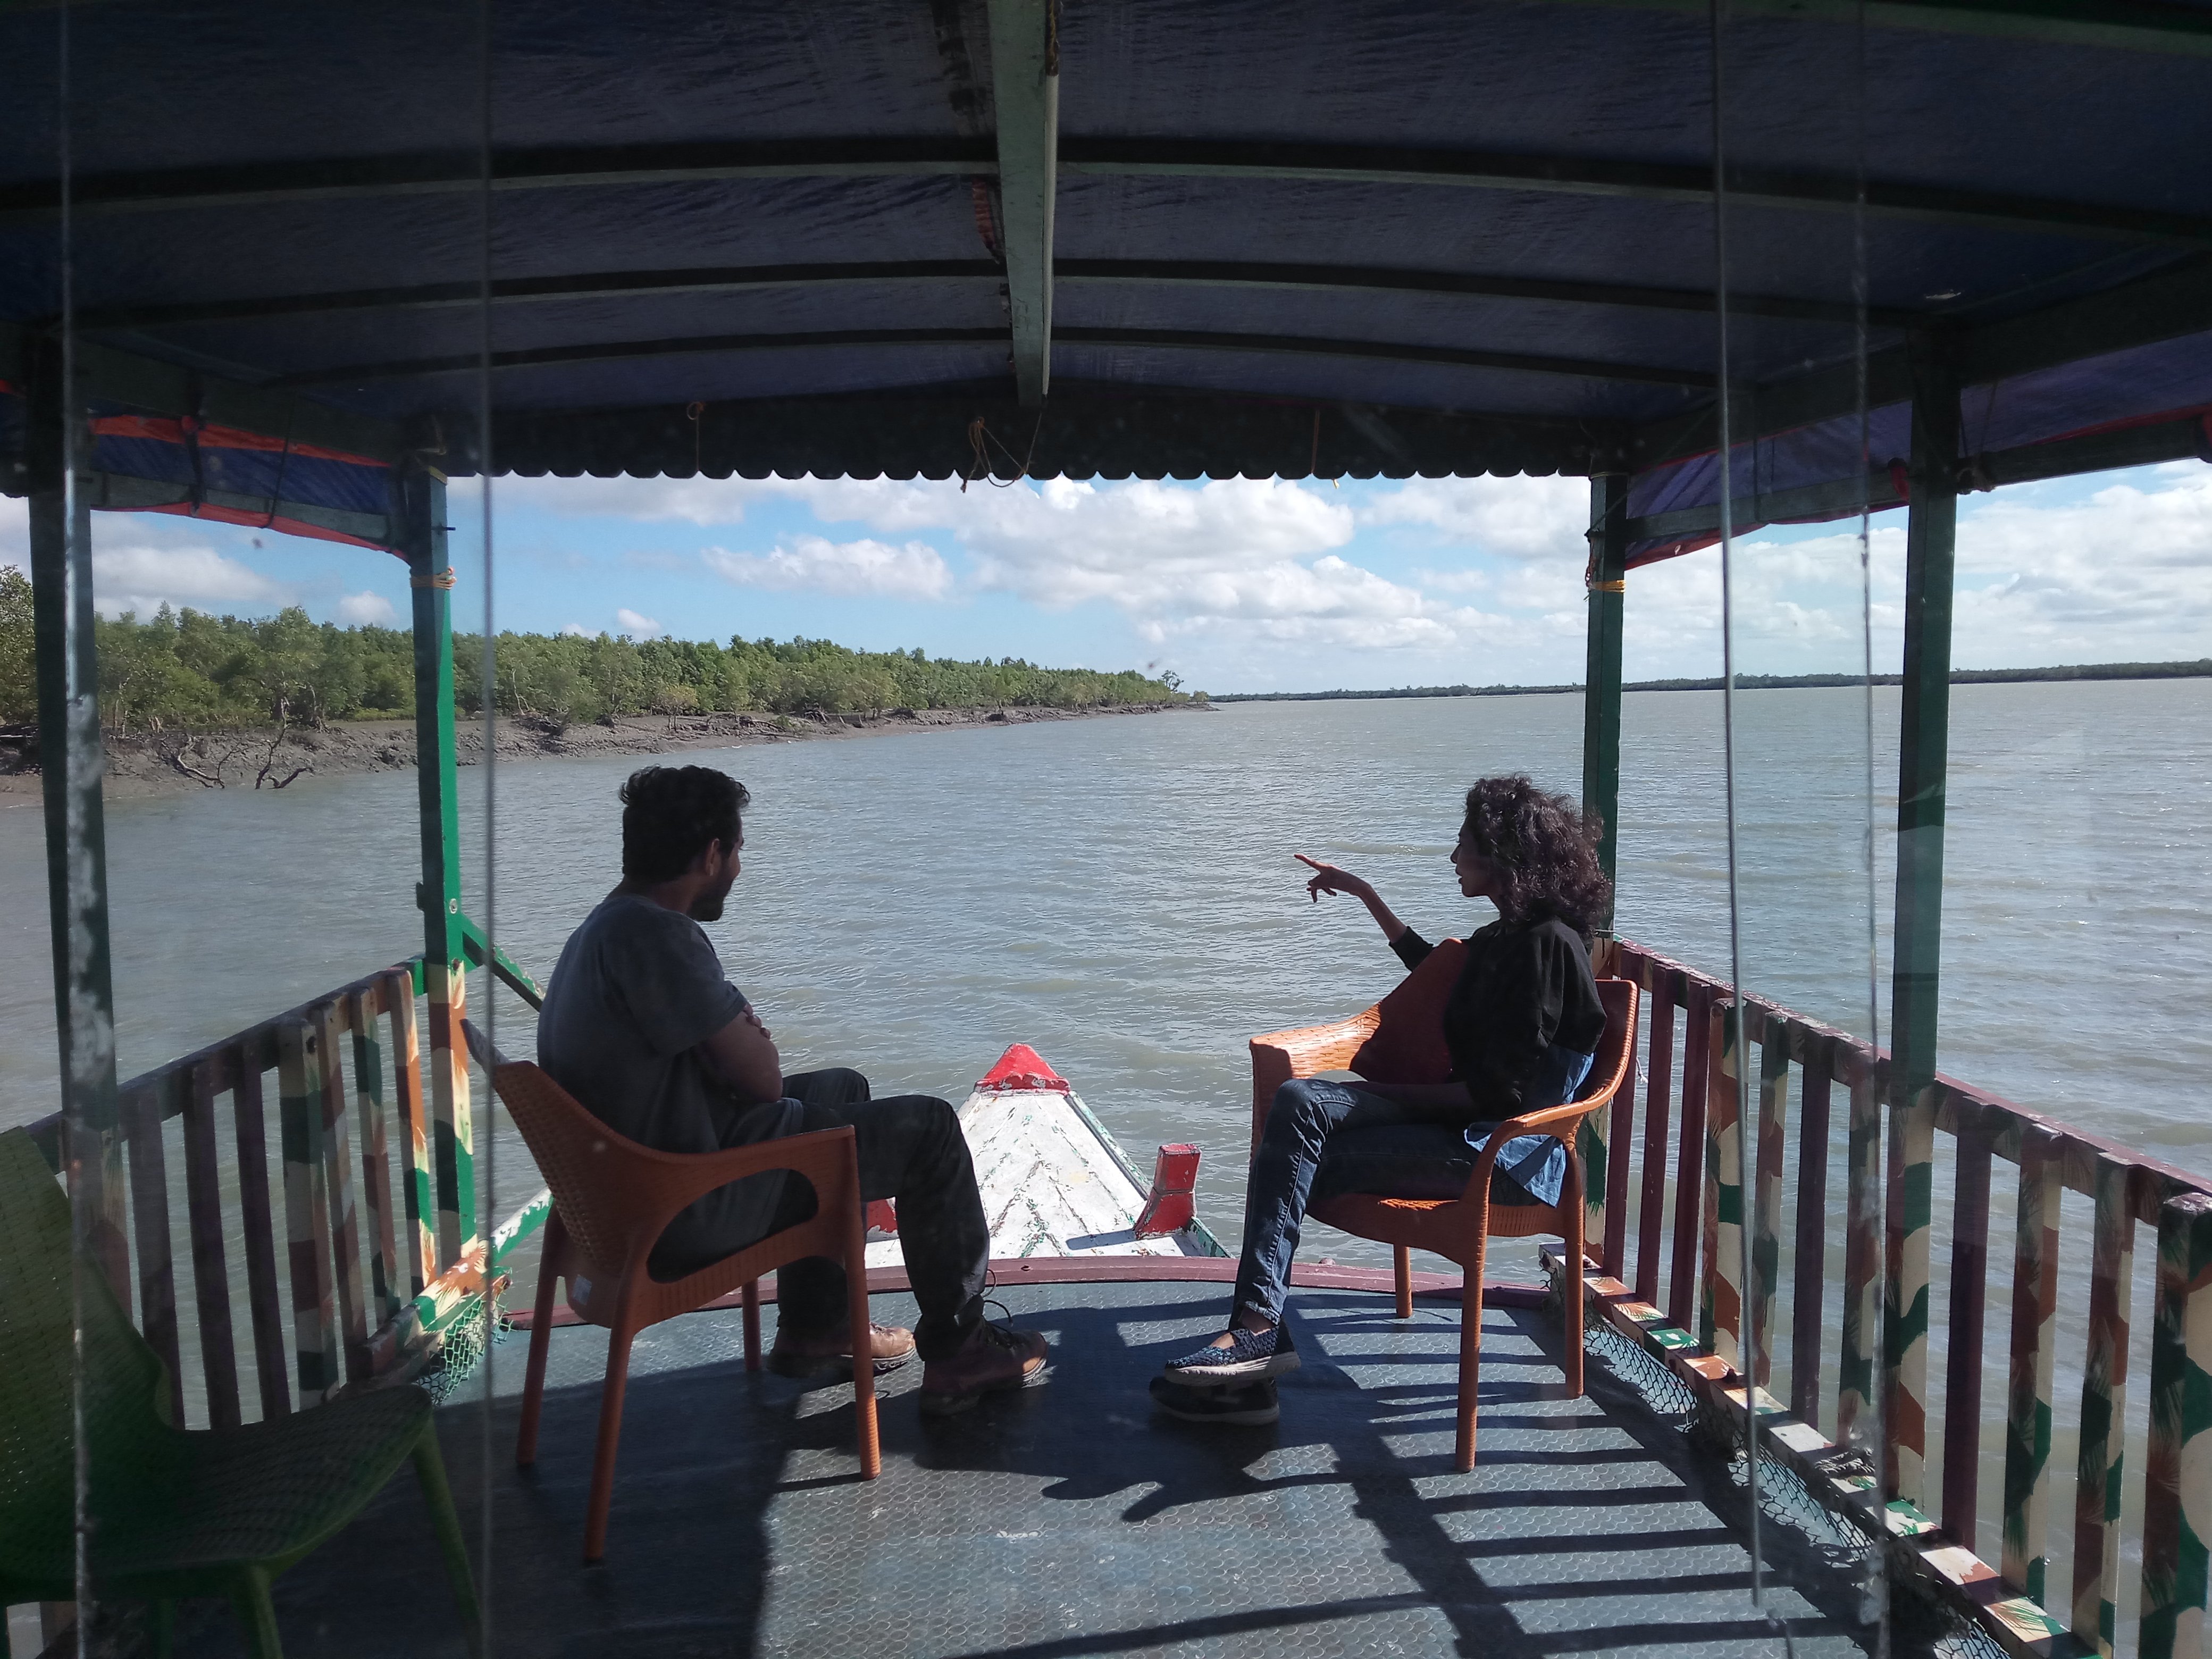 BLOG: Reporting in the Indian Sundarbans brings lessons in resilience